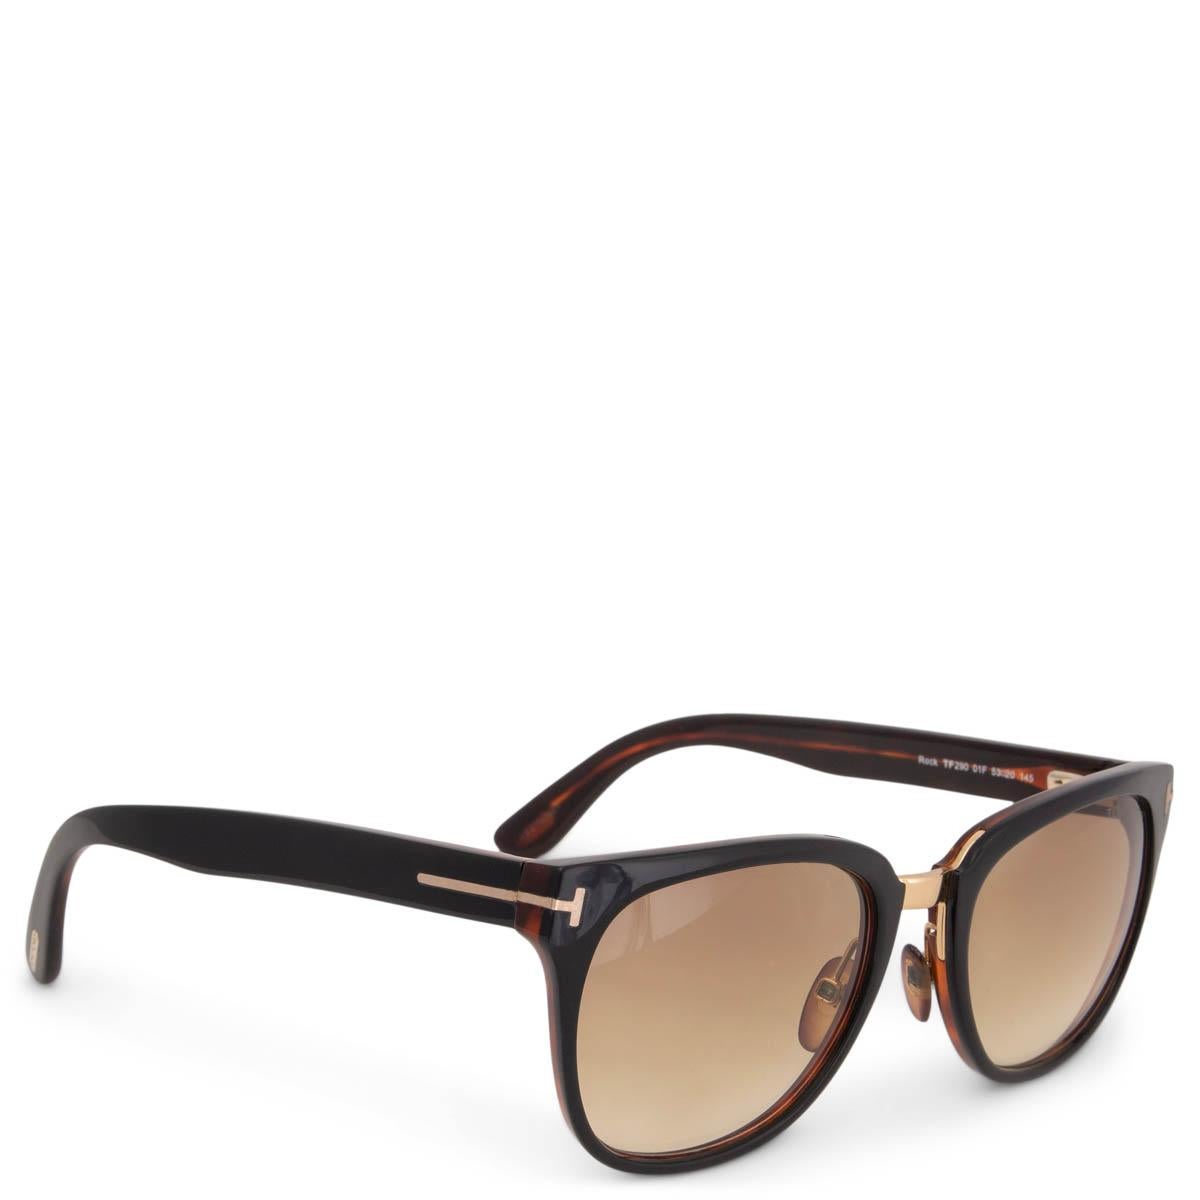 100% authentic Tom Ford Rock sunglasses in espresso brown and cognac brown acetate with gold-tone metal details and light brown gradient lenses. Have been worn and have some faint scratches on the lenses. Overall in very good condition. Comes with